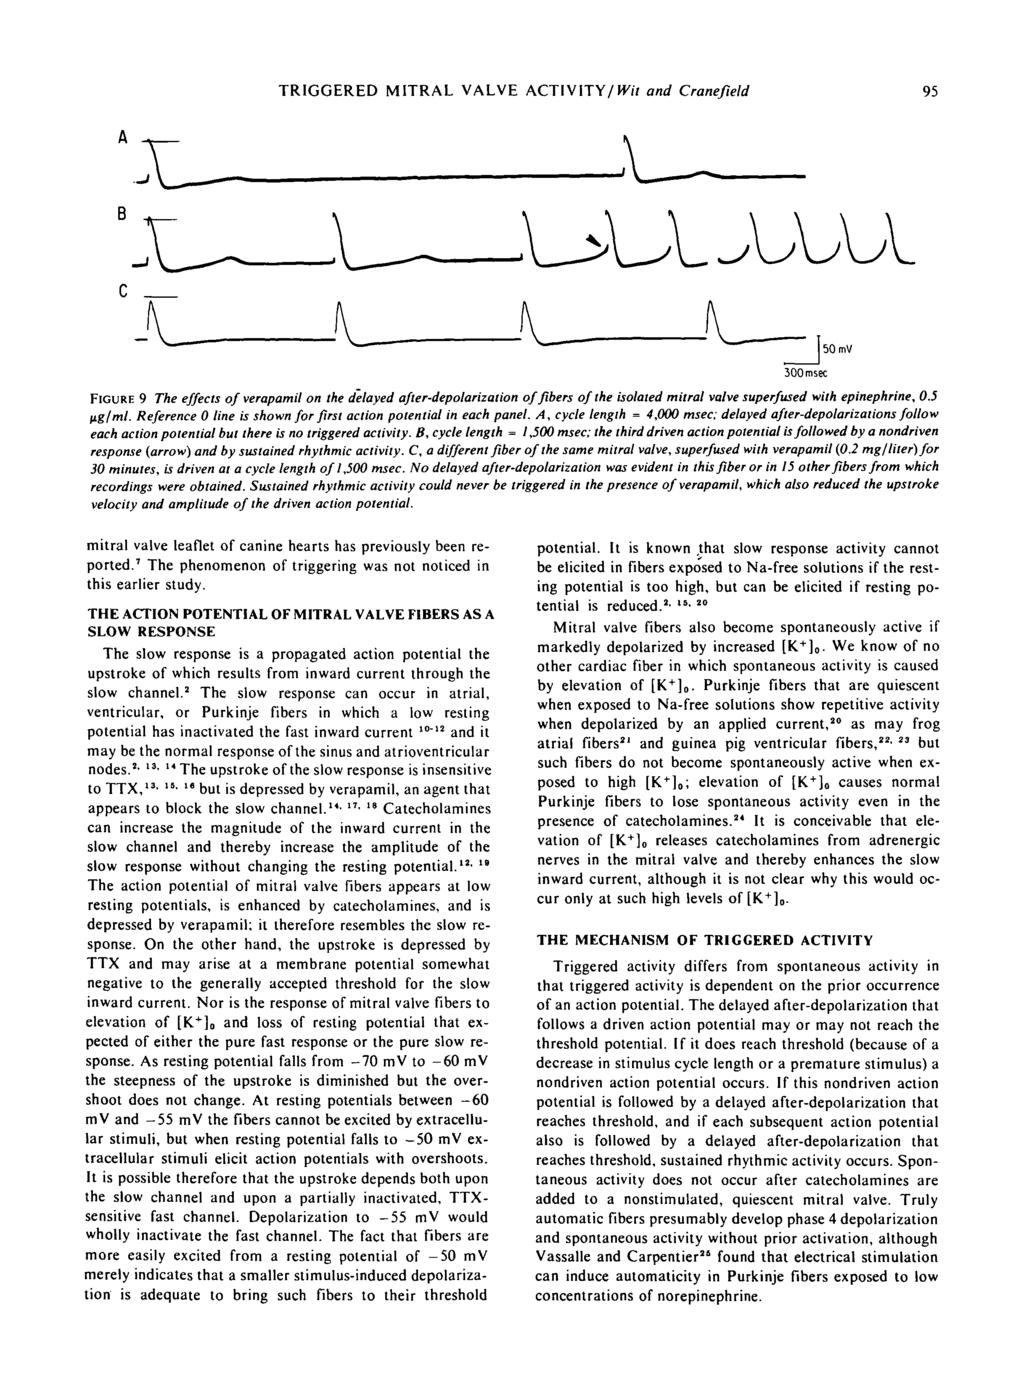 i ' TRIGGERED MITRAL VALVE ACTIVITY/Wit and Cranefteld 95 FIGURE 9 The effects f verapamil n the delayed after-deplarizatin f fibers f the islated mitral valve superfused with epinephrine, 0.5 Hg/ml.